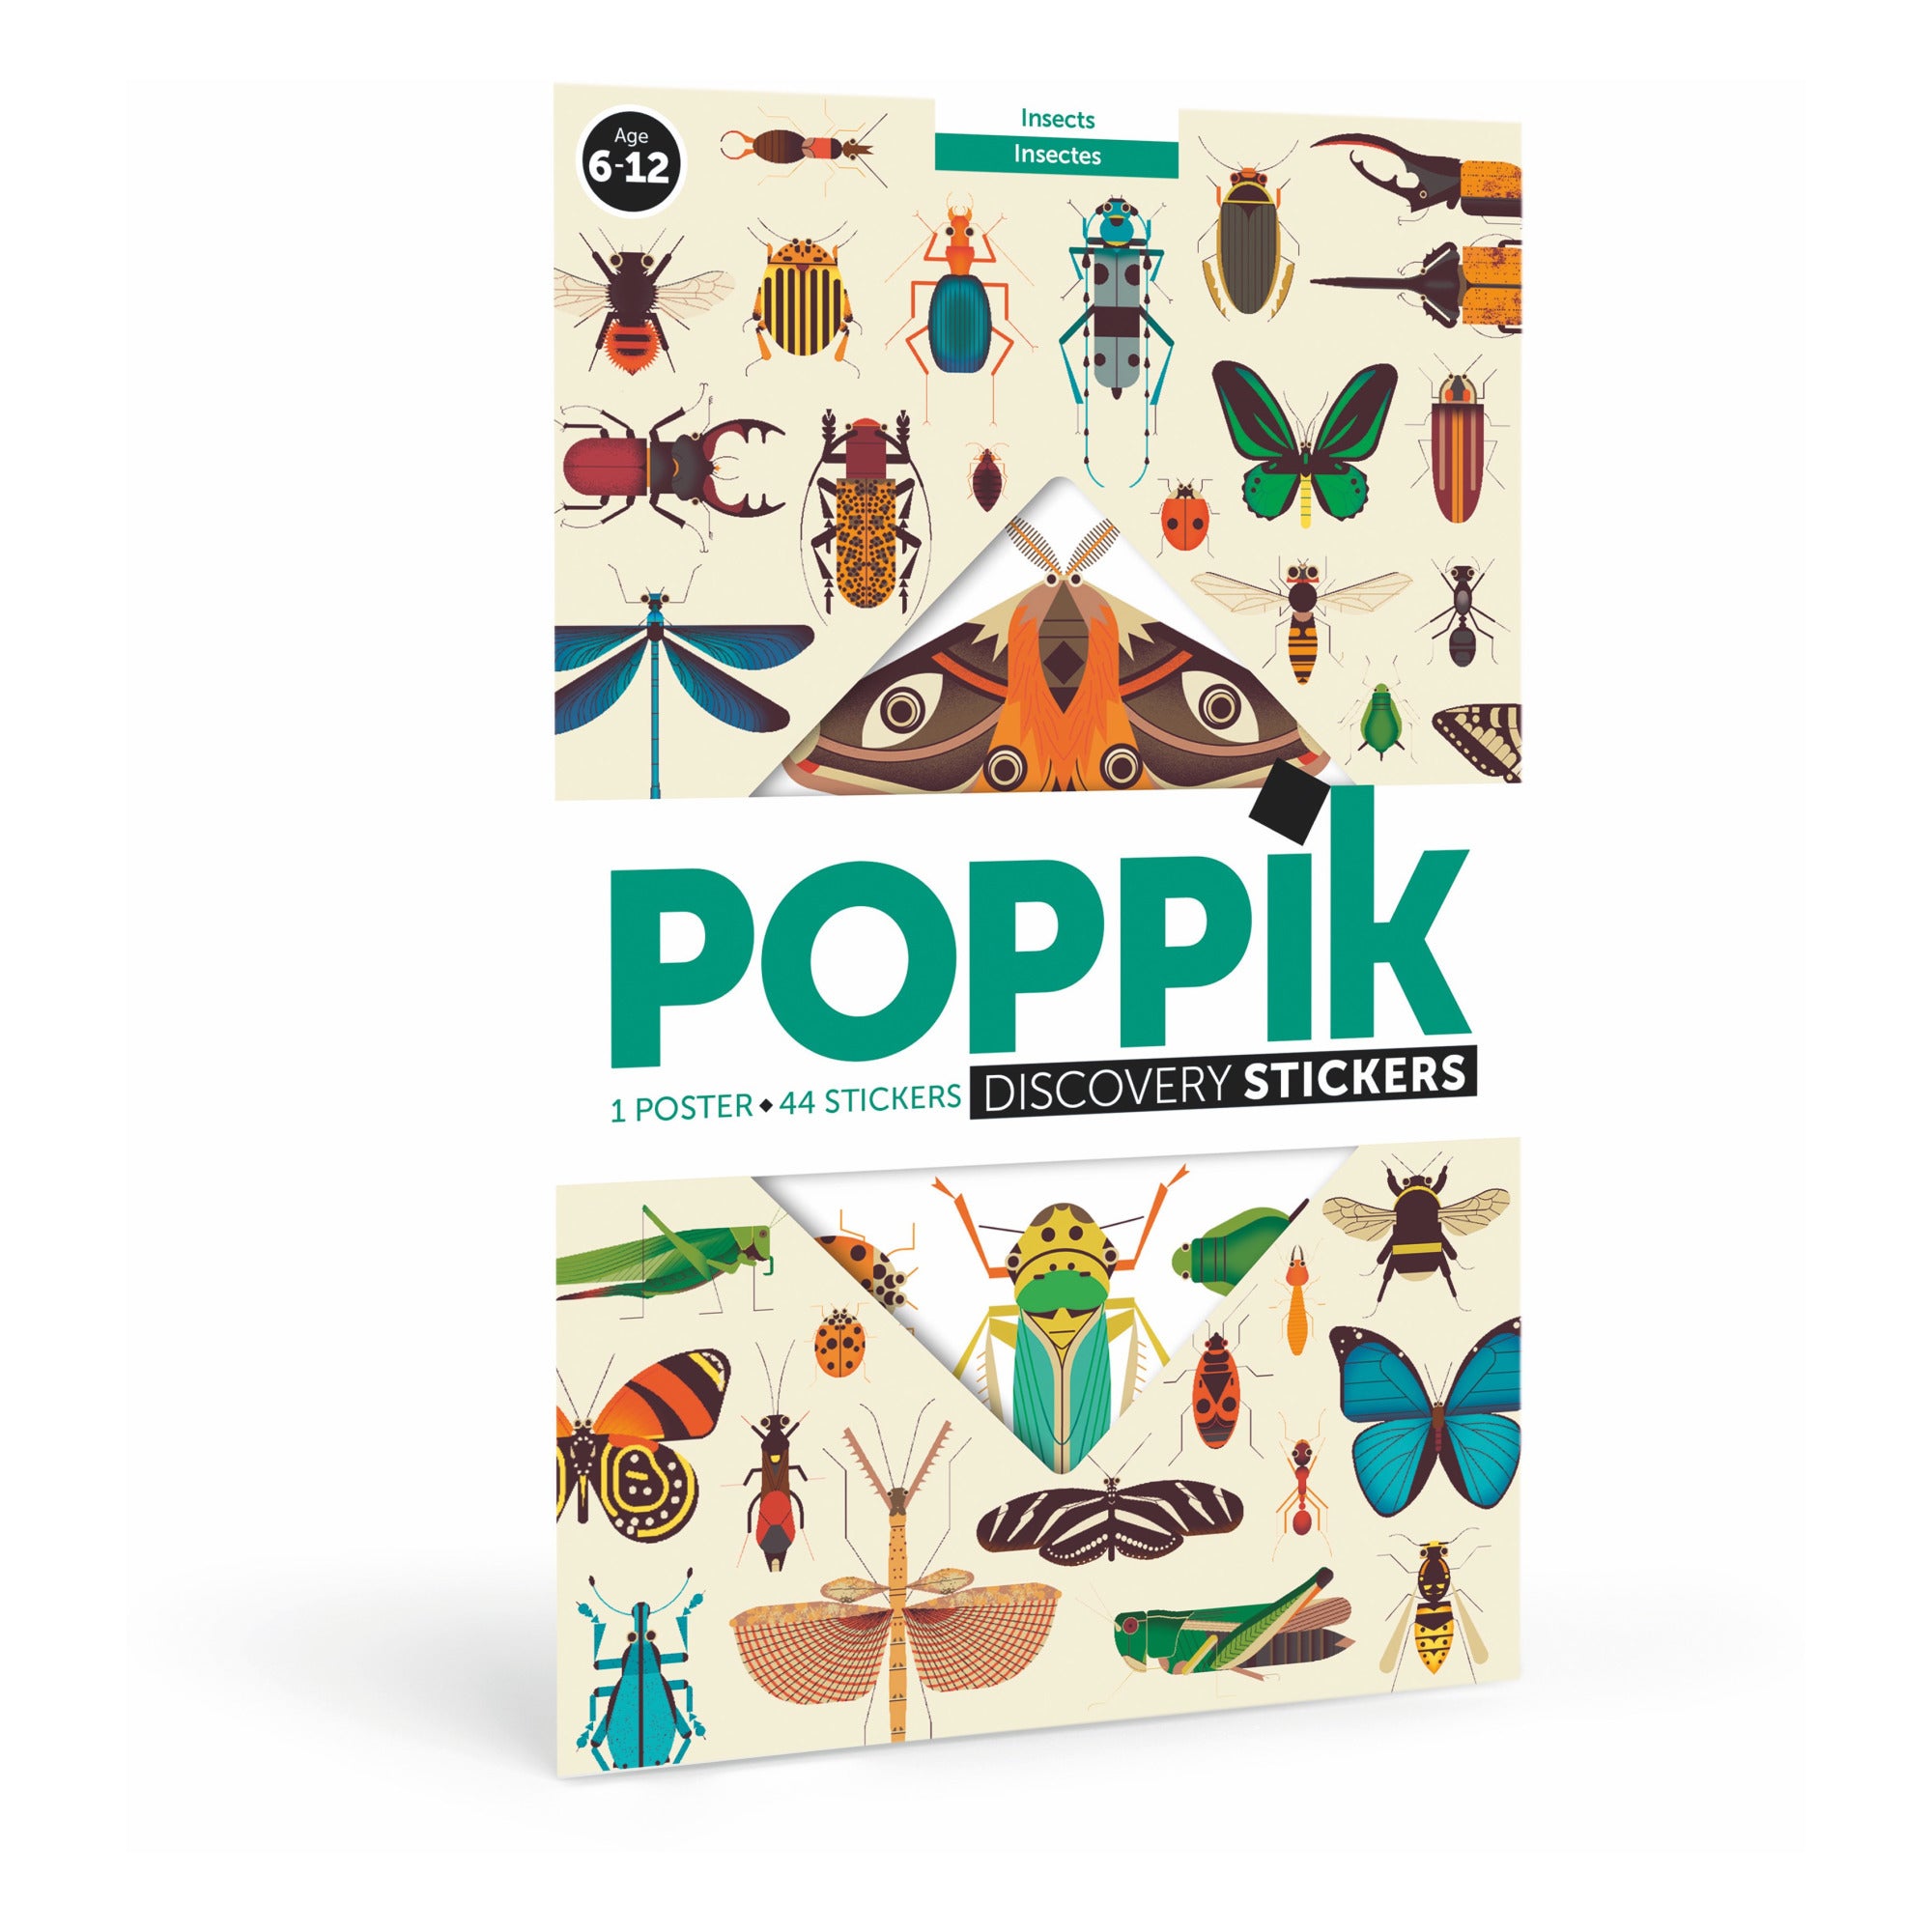 Poppik Insects Stickers Poster 